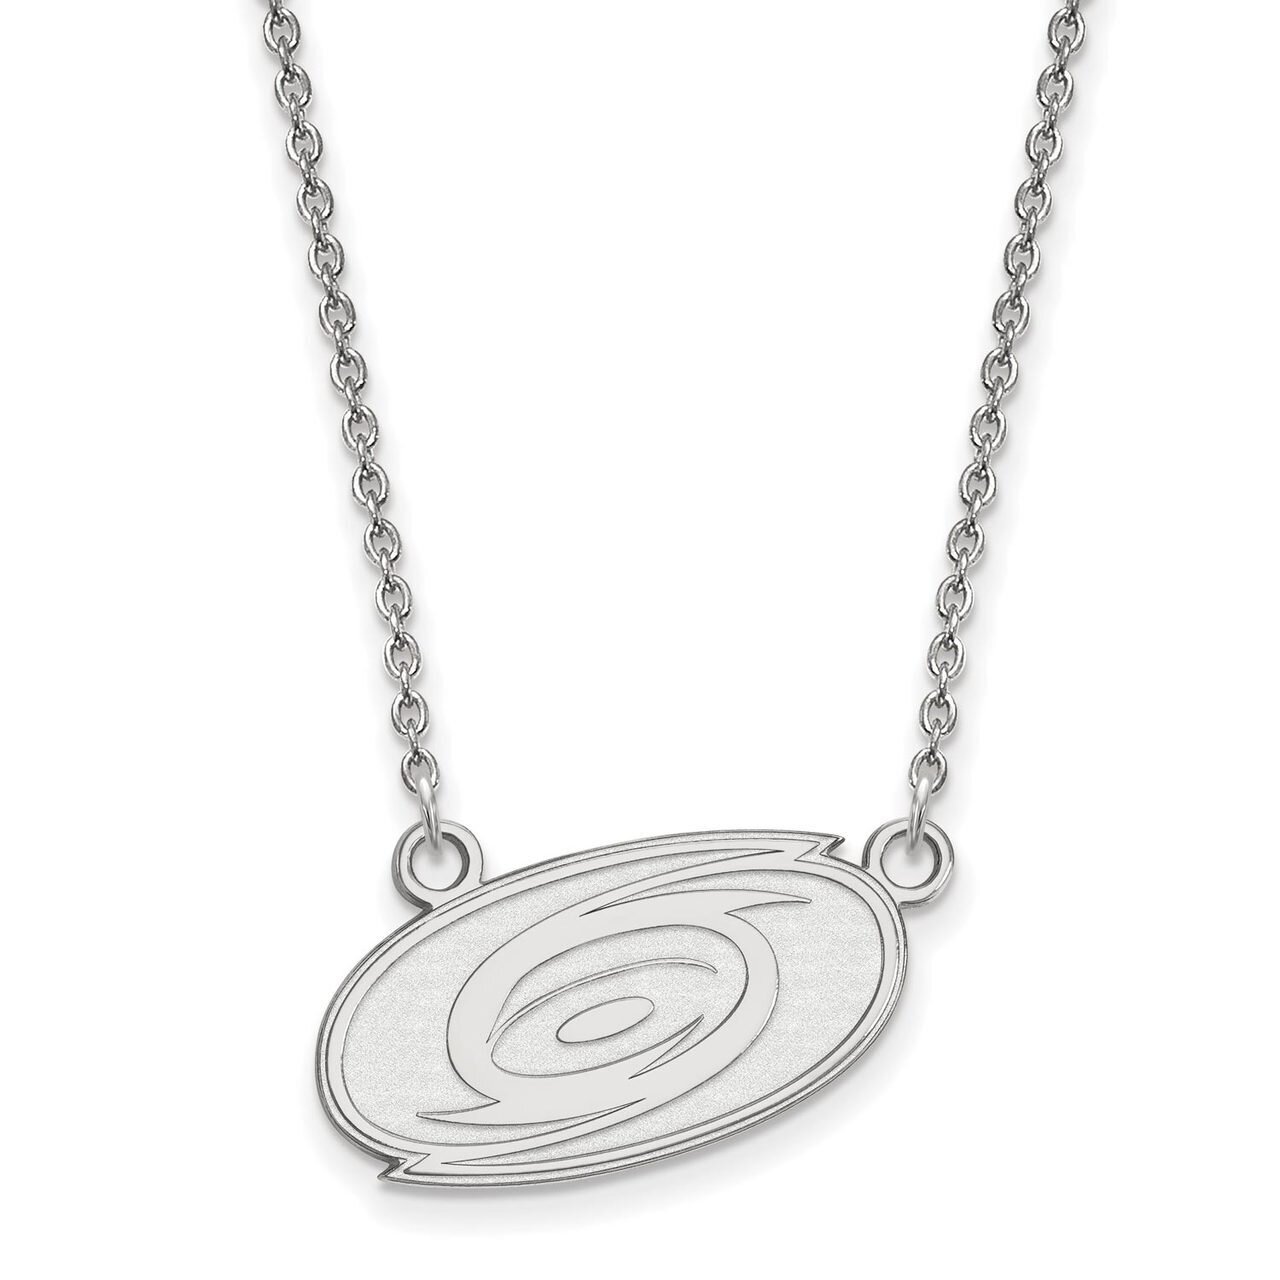 Carolina Hurricanes Small Pendant with Chain Necklace 10k White Gold 1W007HUR-18